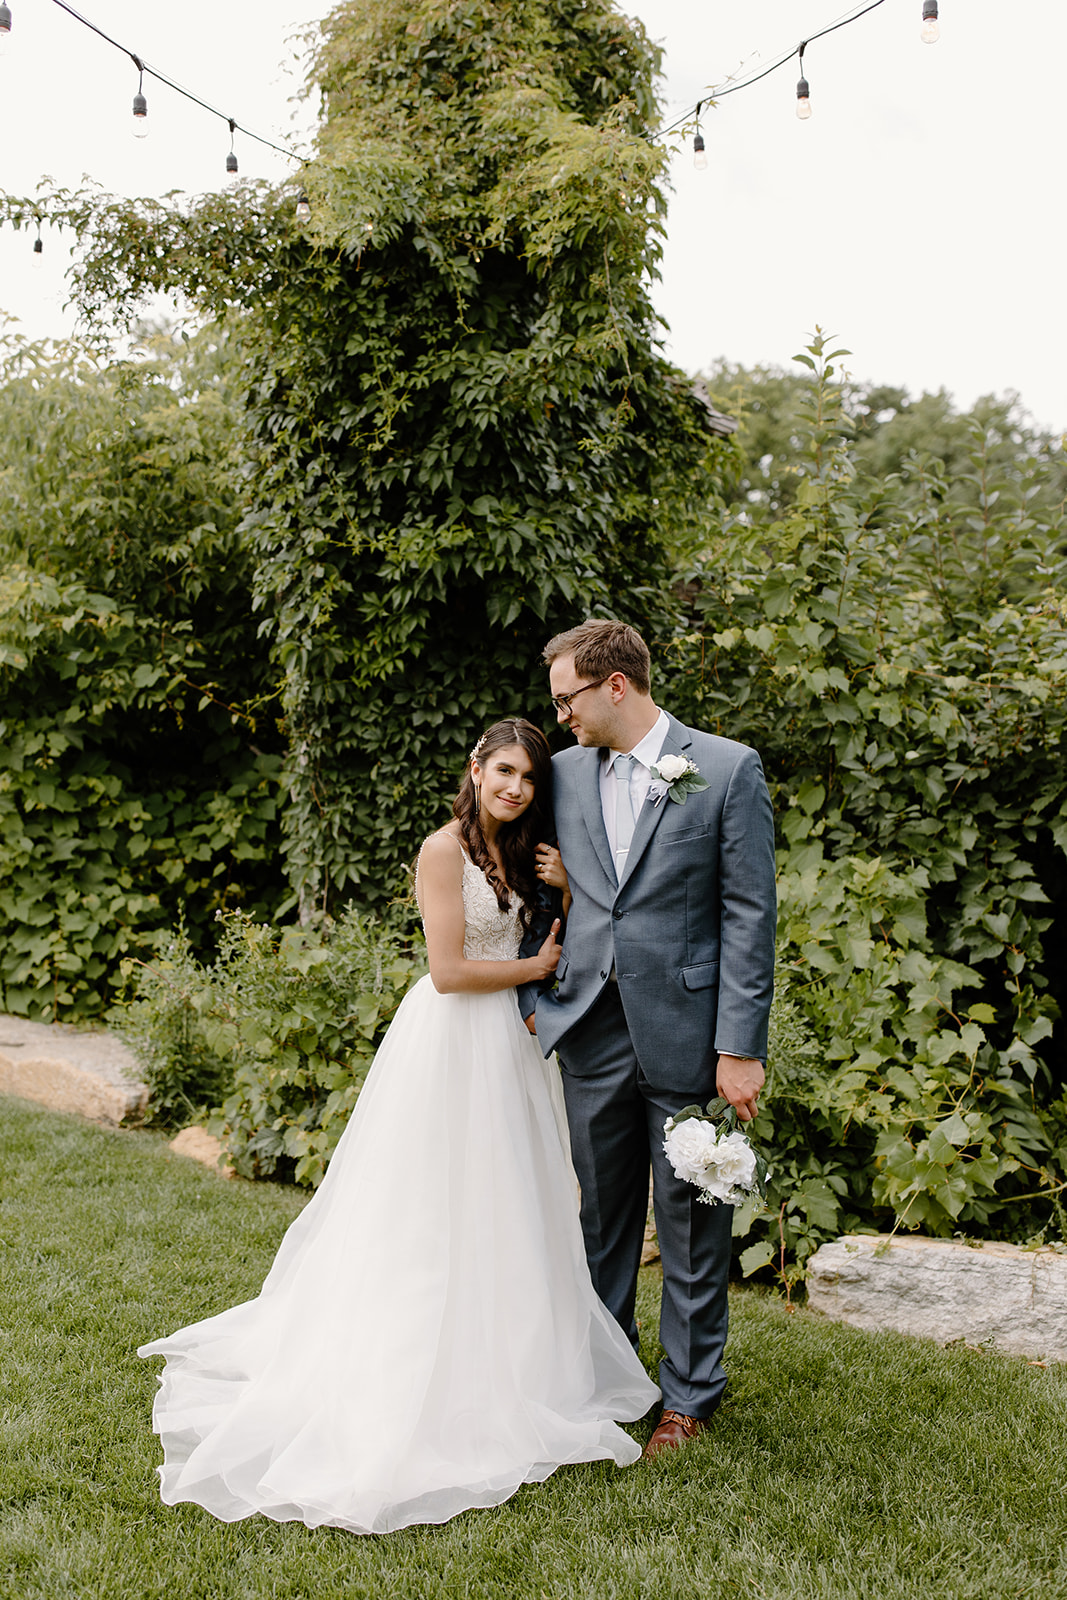 Groom looks down at his bride as she hugs his arm in front of a wall of vines